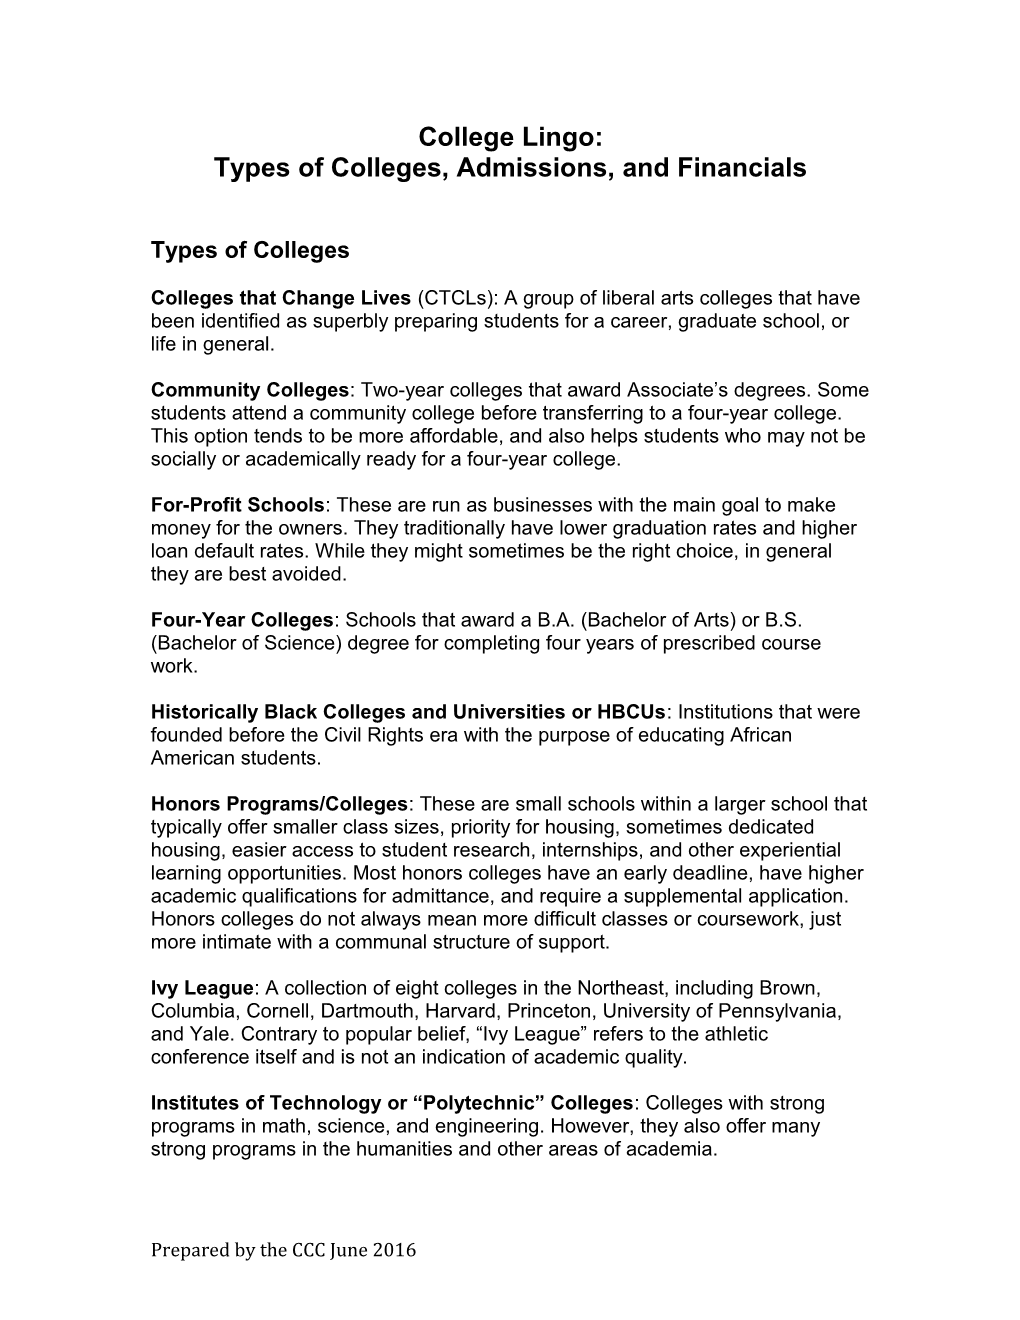 Types of Colleges, Admissions, and Financials